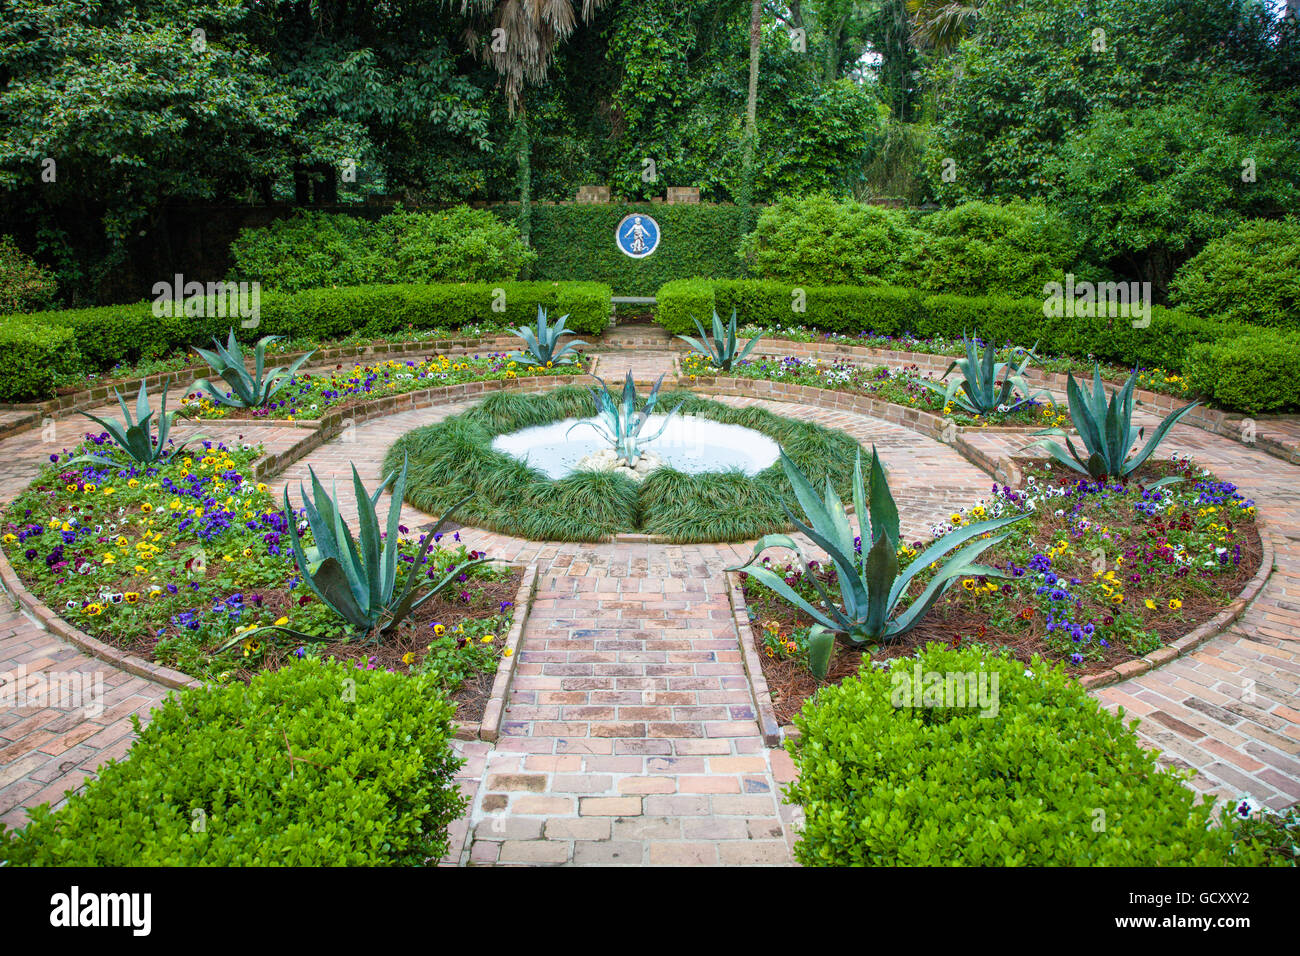 Alfred B Maclay Gardens State Park A U S Historic District Known